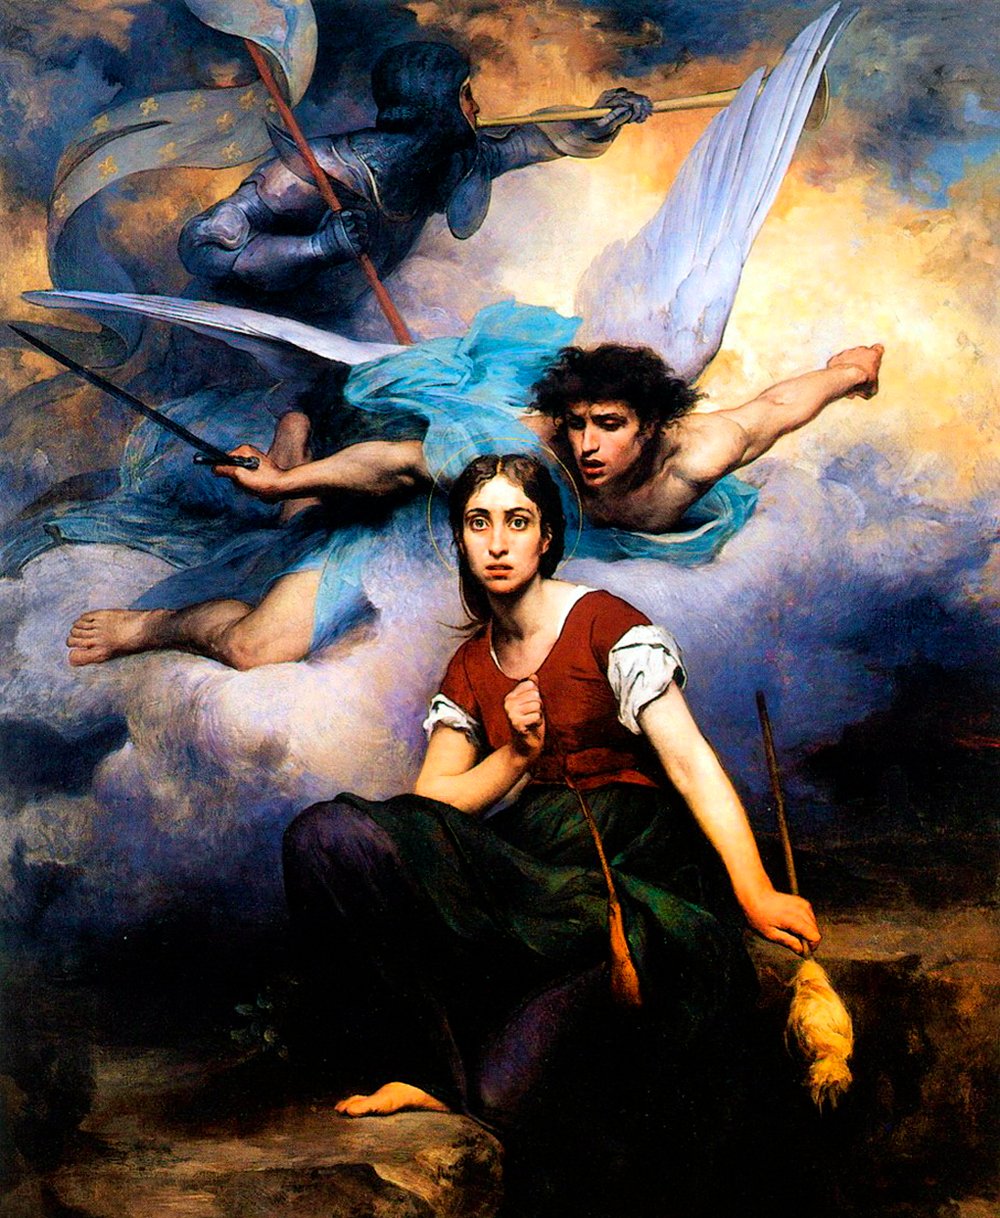 Portrait illustrating Joan of Arc's reverence during a vision of Archangel Michael.